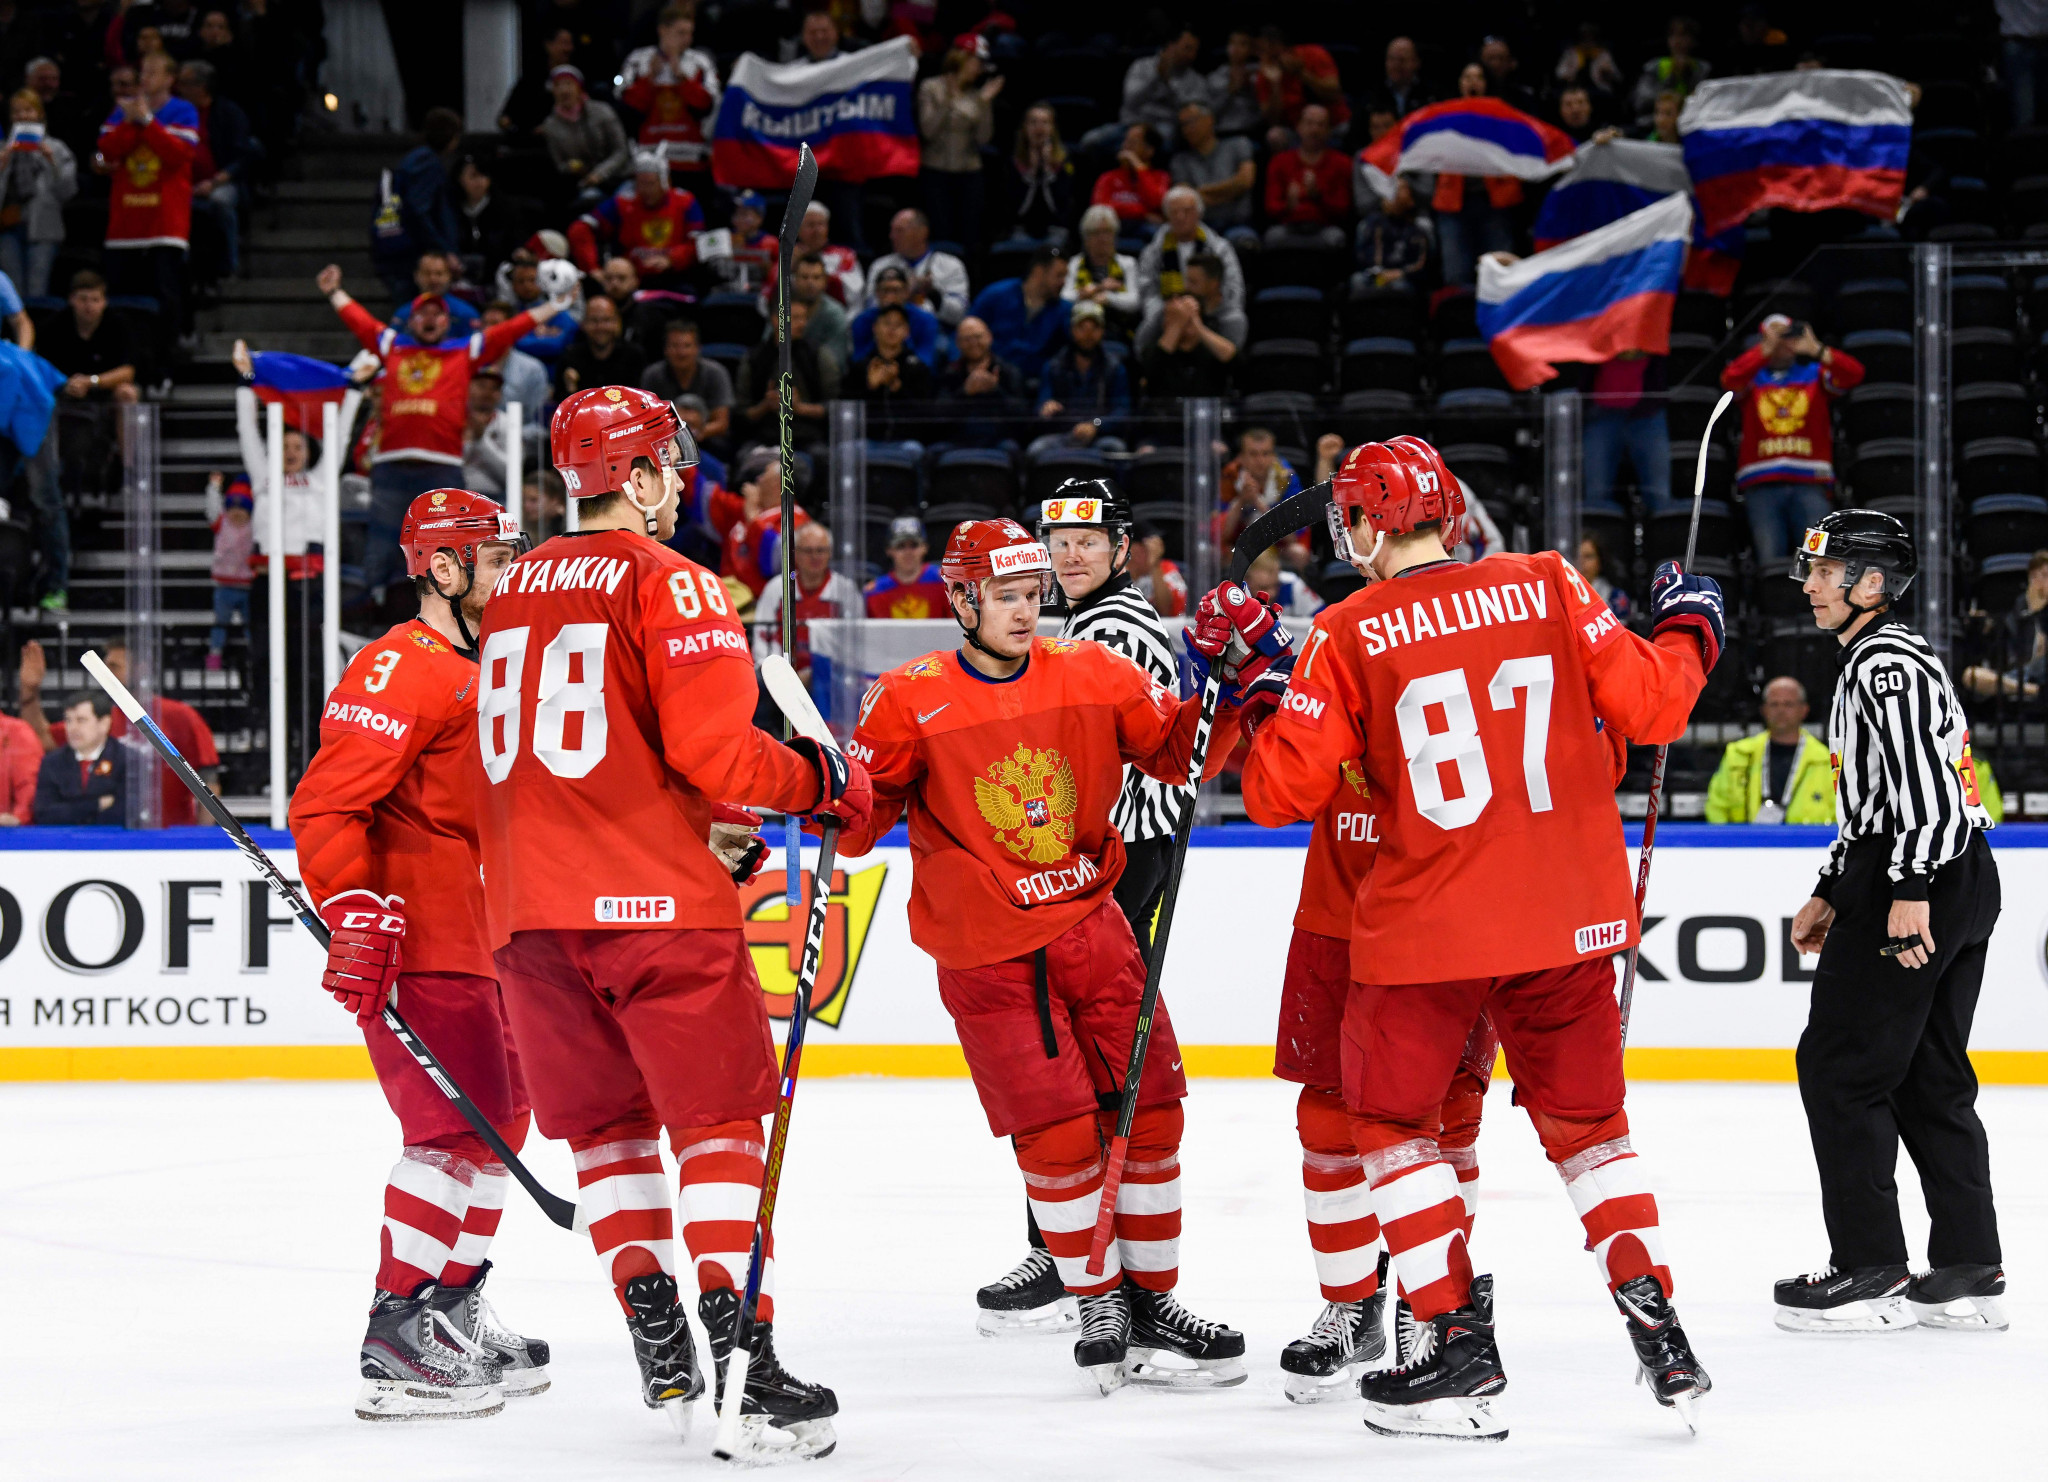 Russia have secured three convincing wins in Denmark so far ©Getty Images